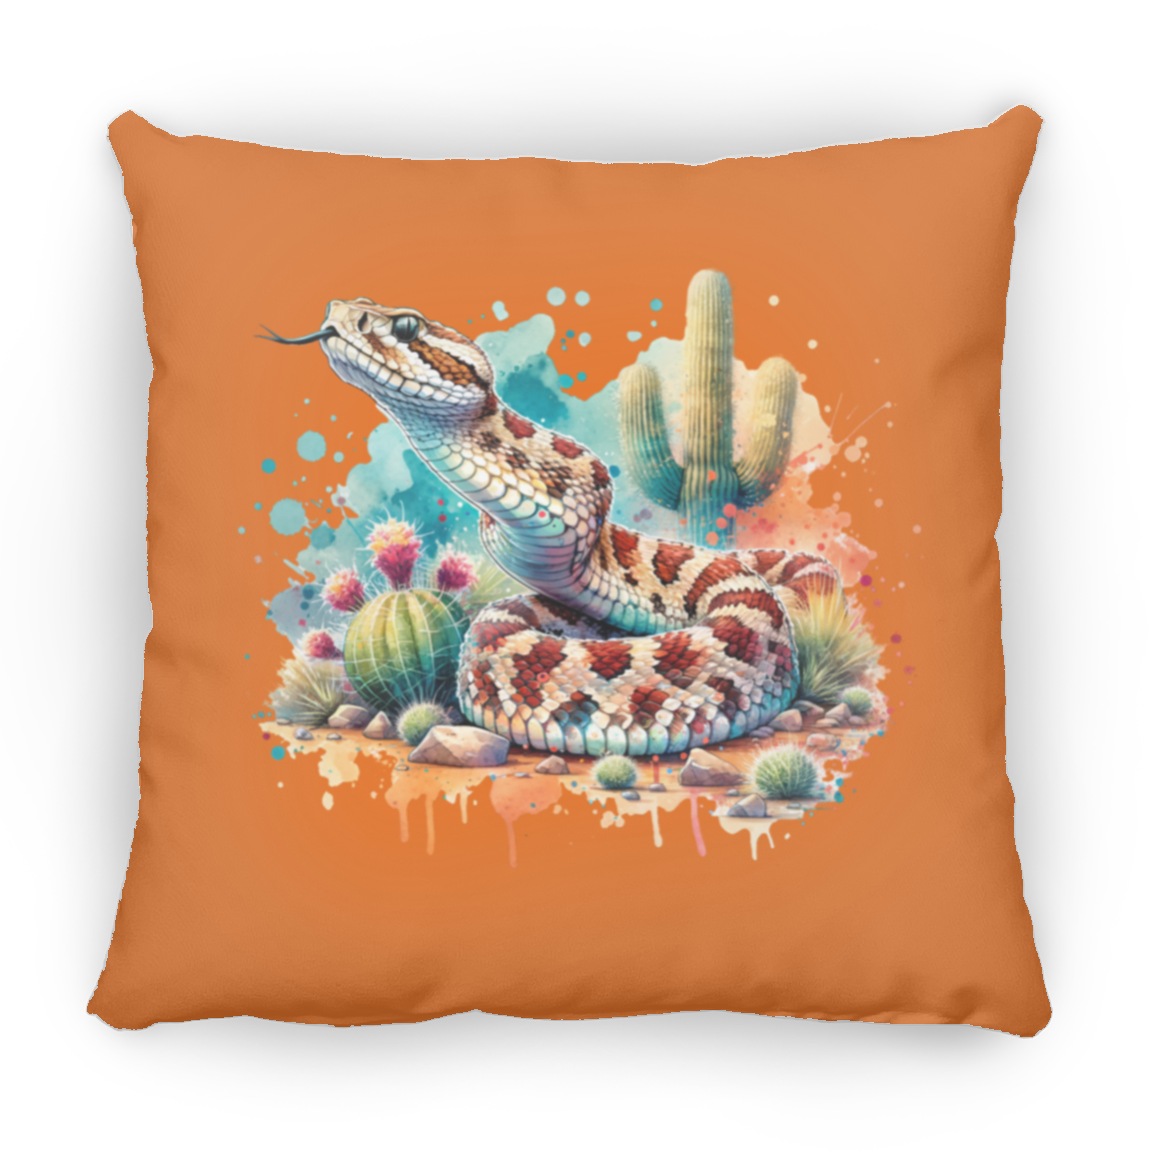 Rattlesnake Scenting the Air - Pillows